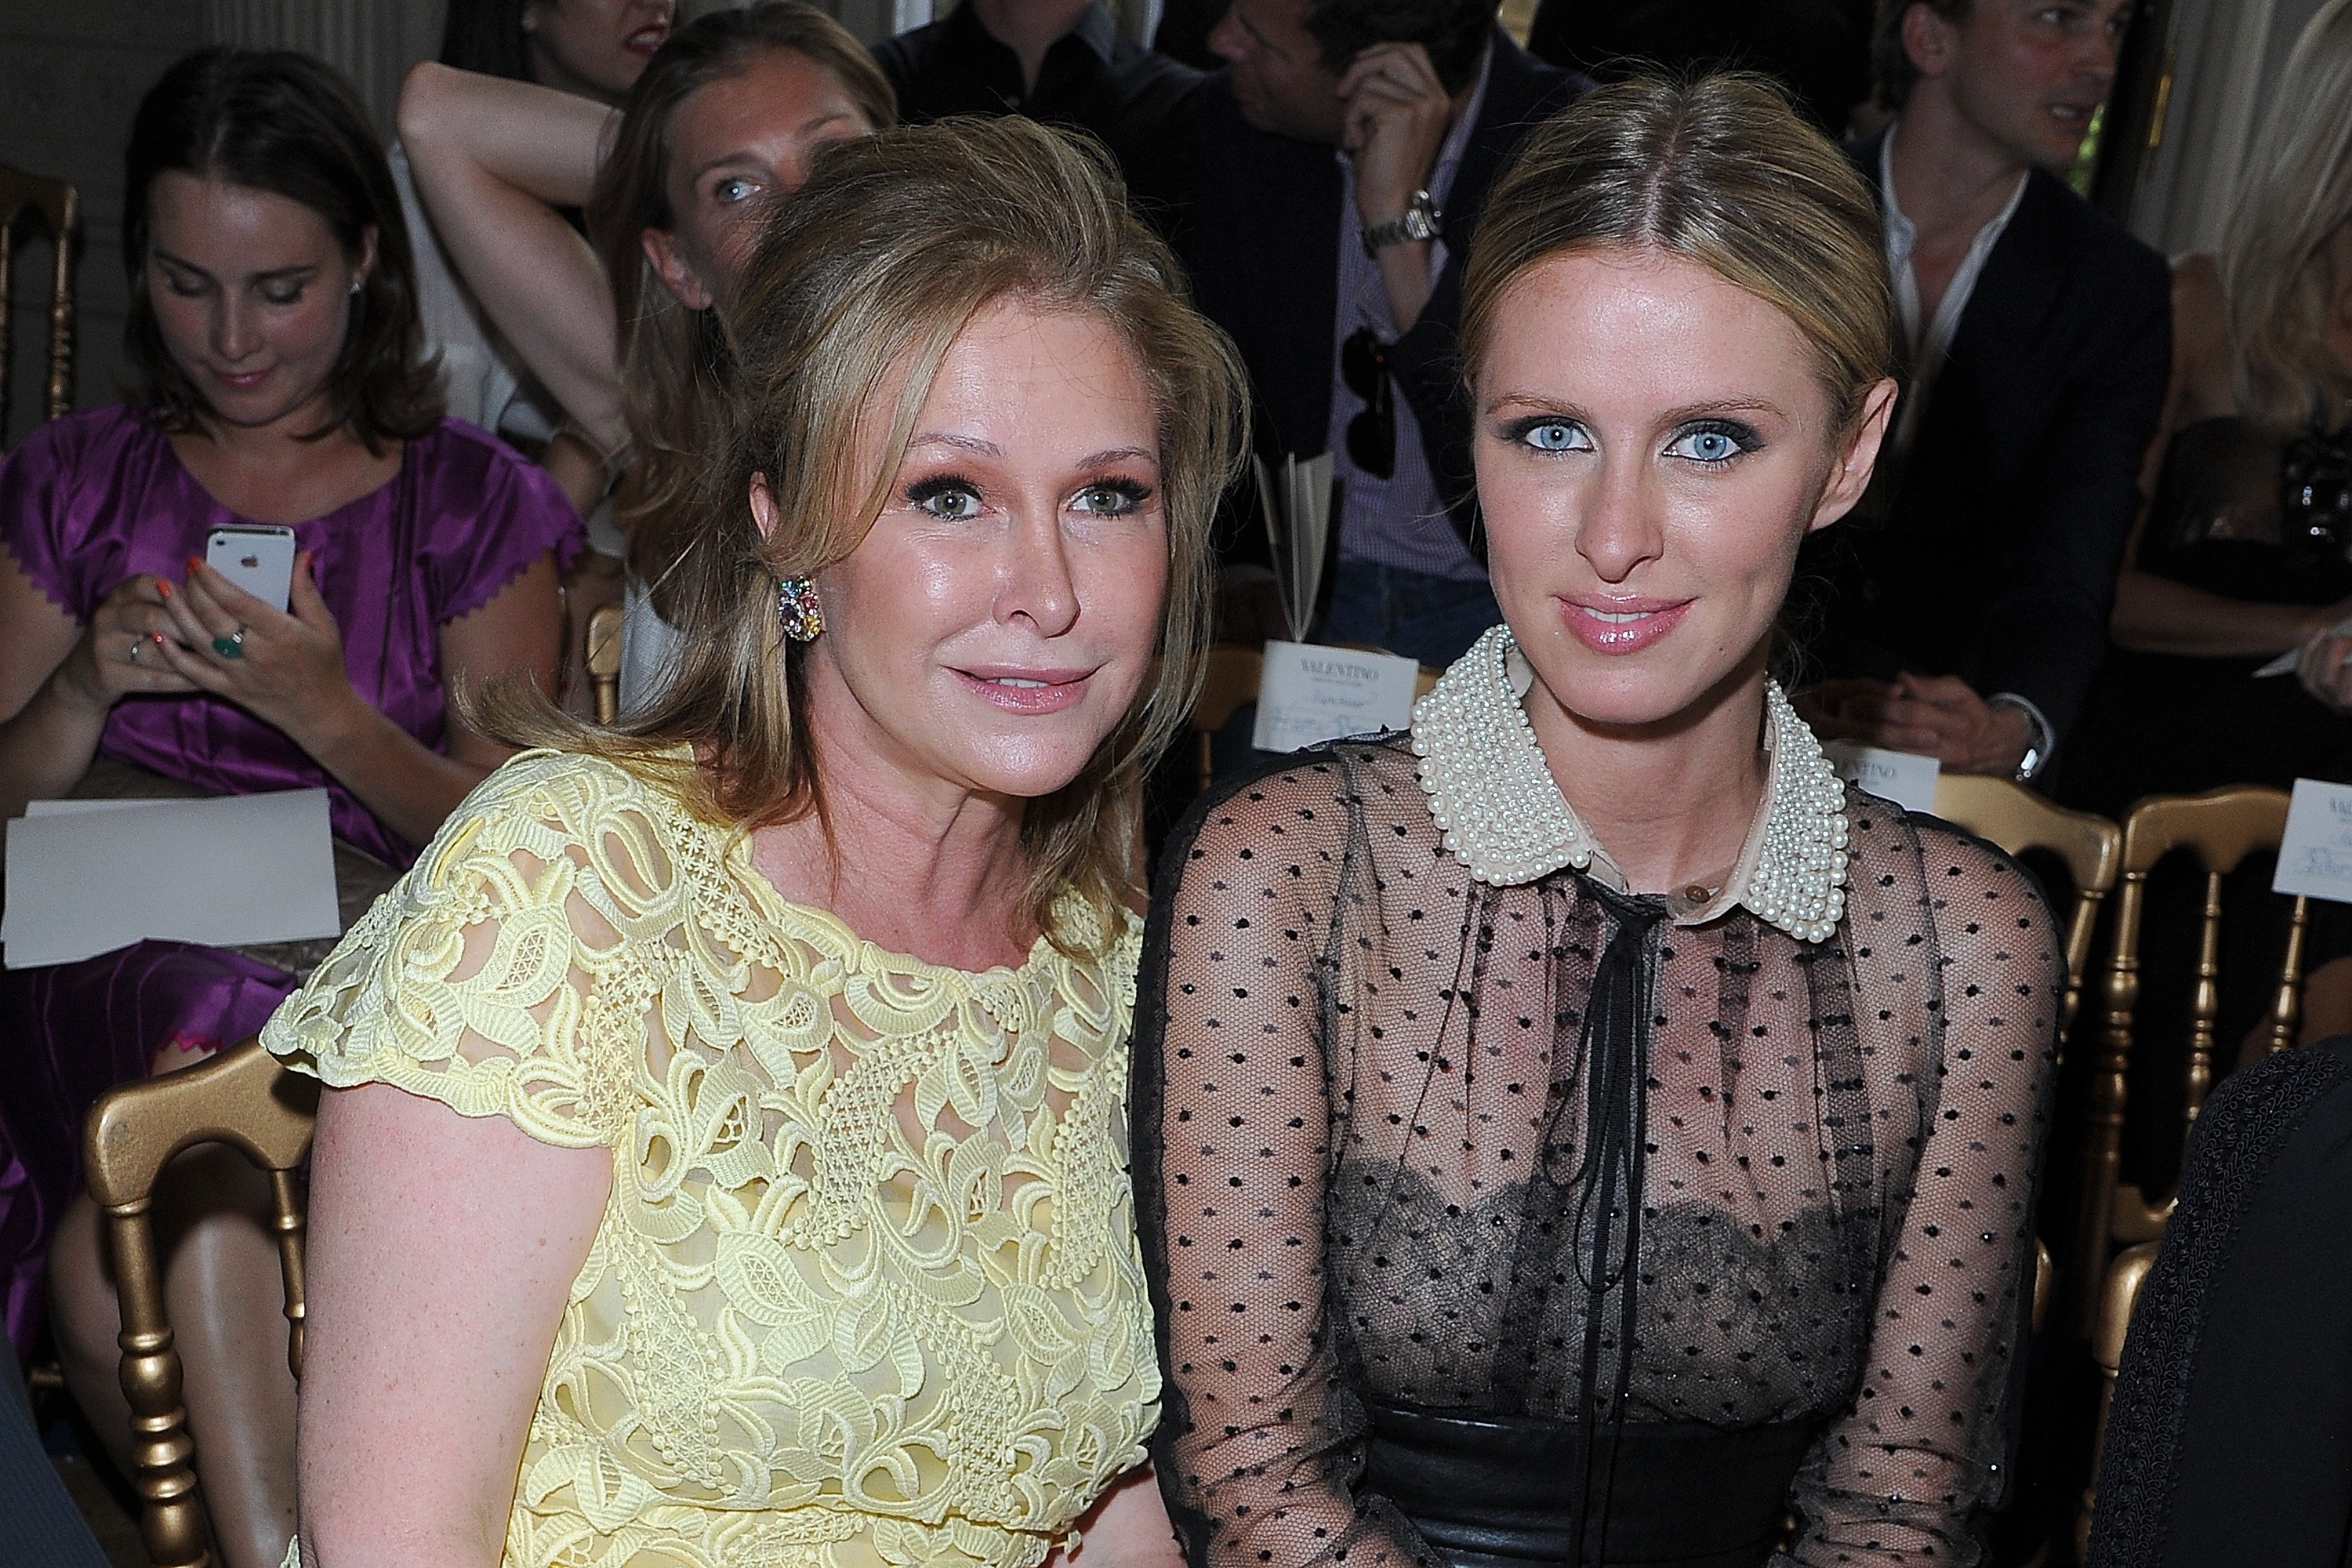 Kathy Hilton and Nicky Hilton at the Valentino Haute-Couture during Fashion Week Fall / Winter 2012/13, in Paris, France. | Source: Getty Images